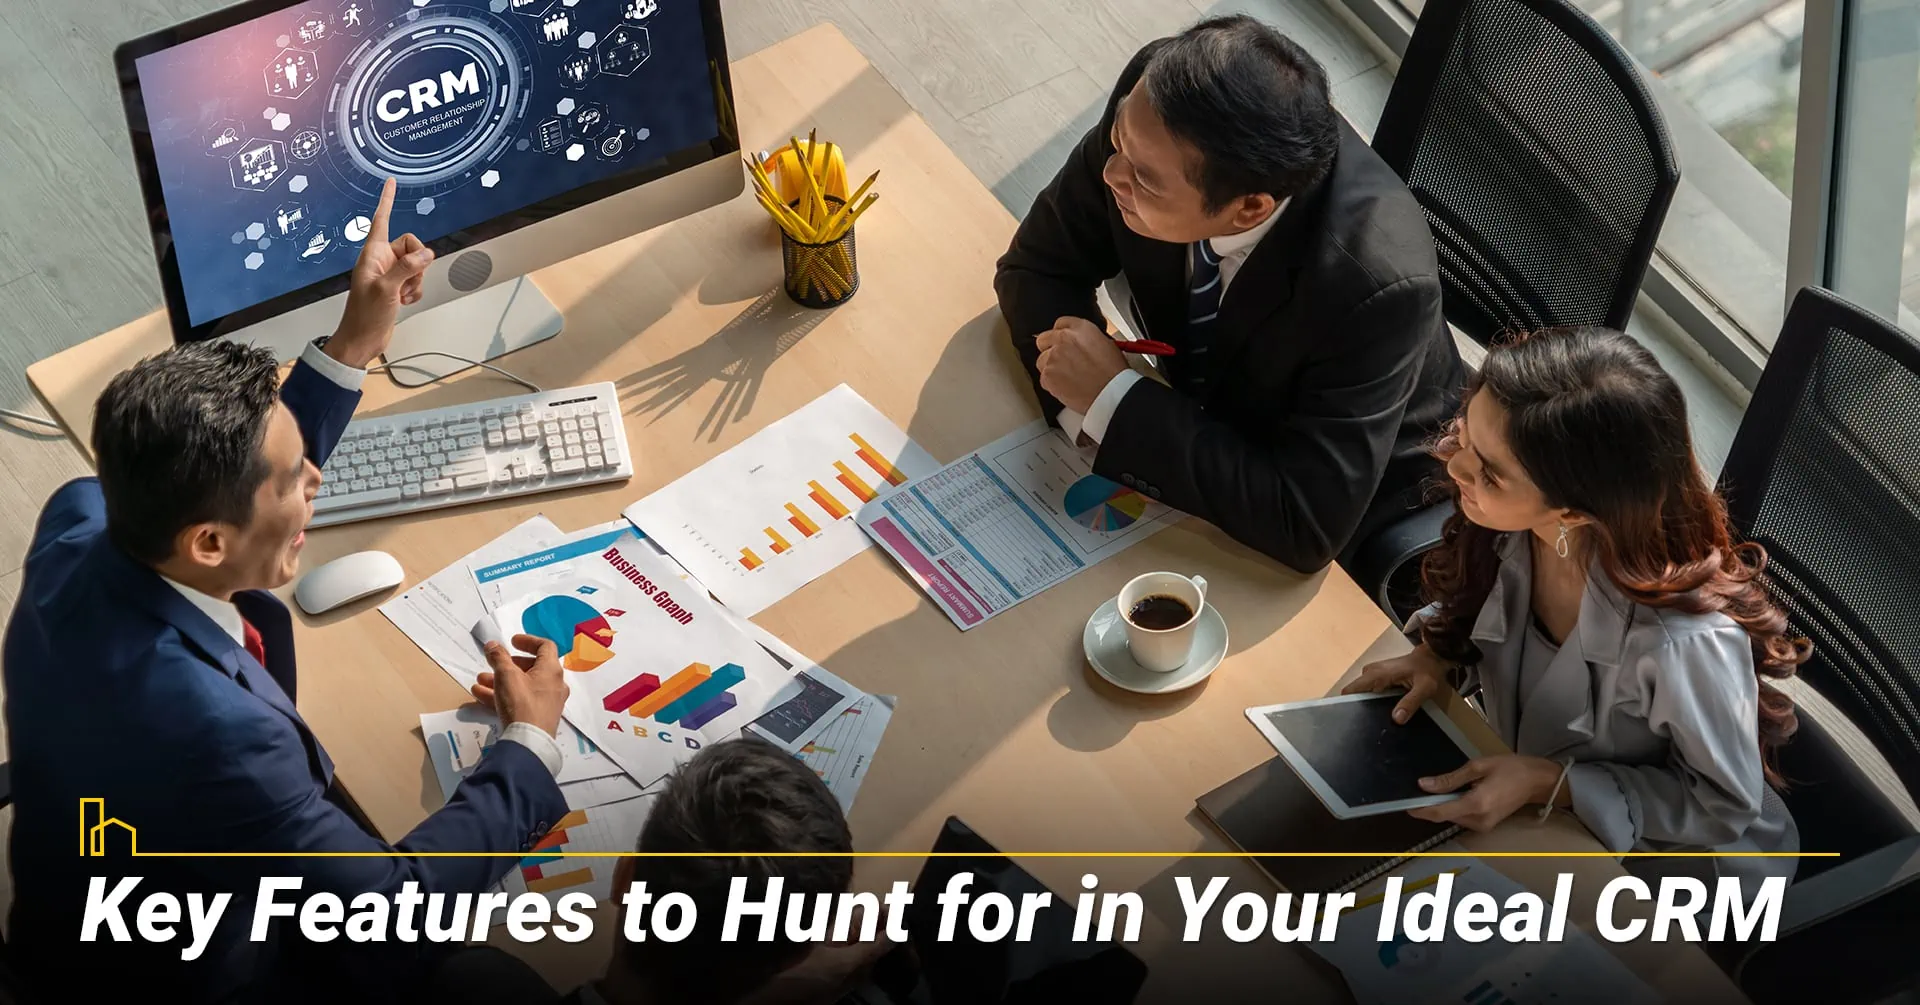 Key Features to Hunt for in Your Ideal CRM